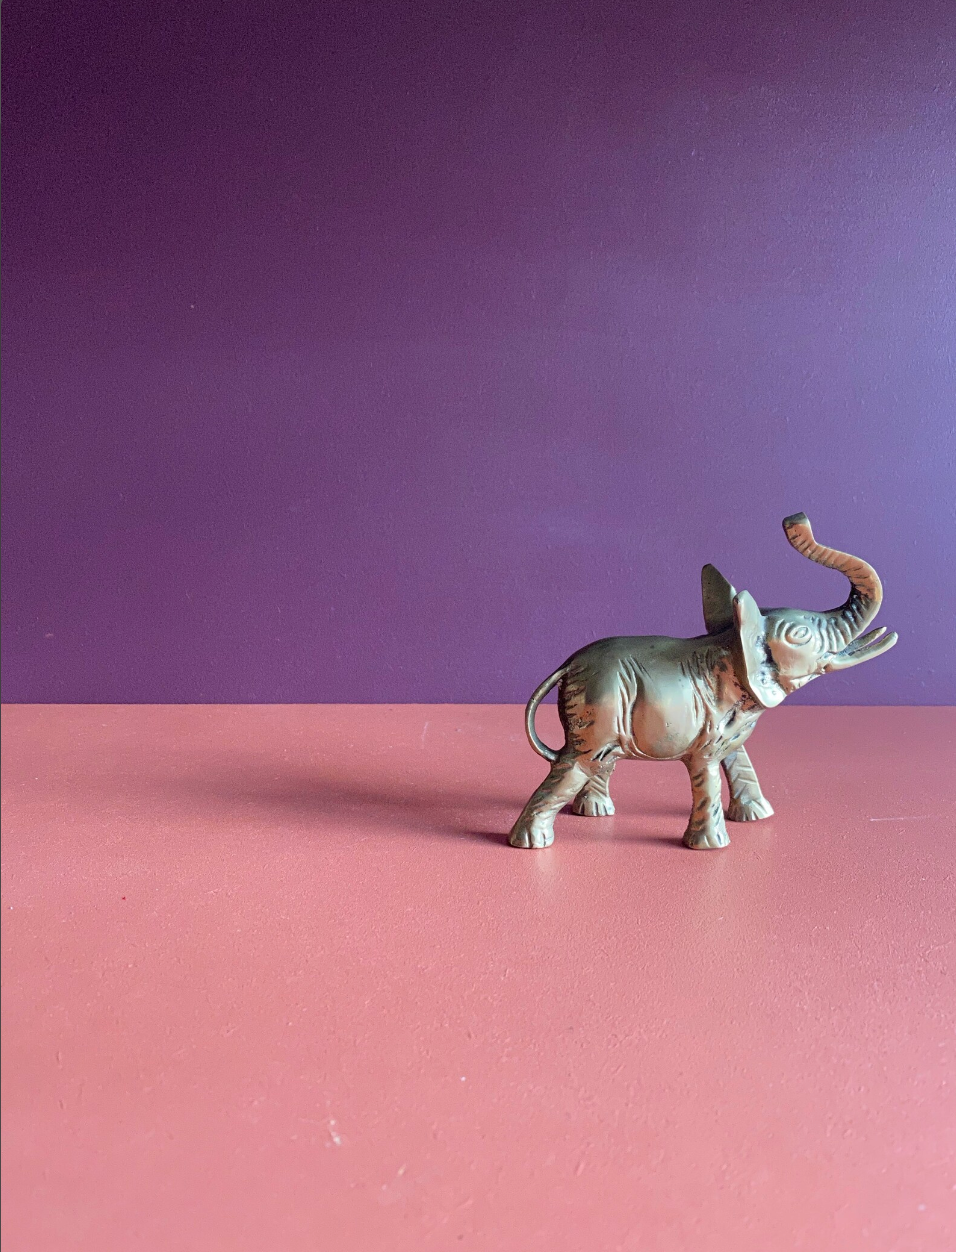 A brass elephant figurine on a pink surface against a purple wall.